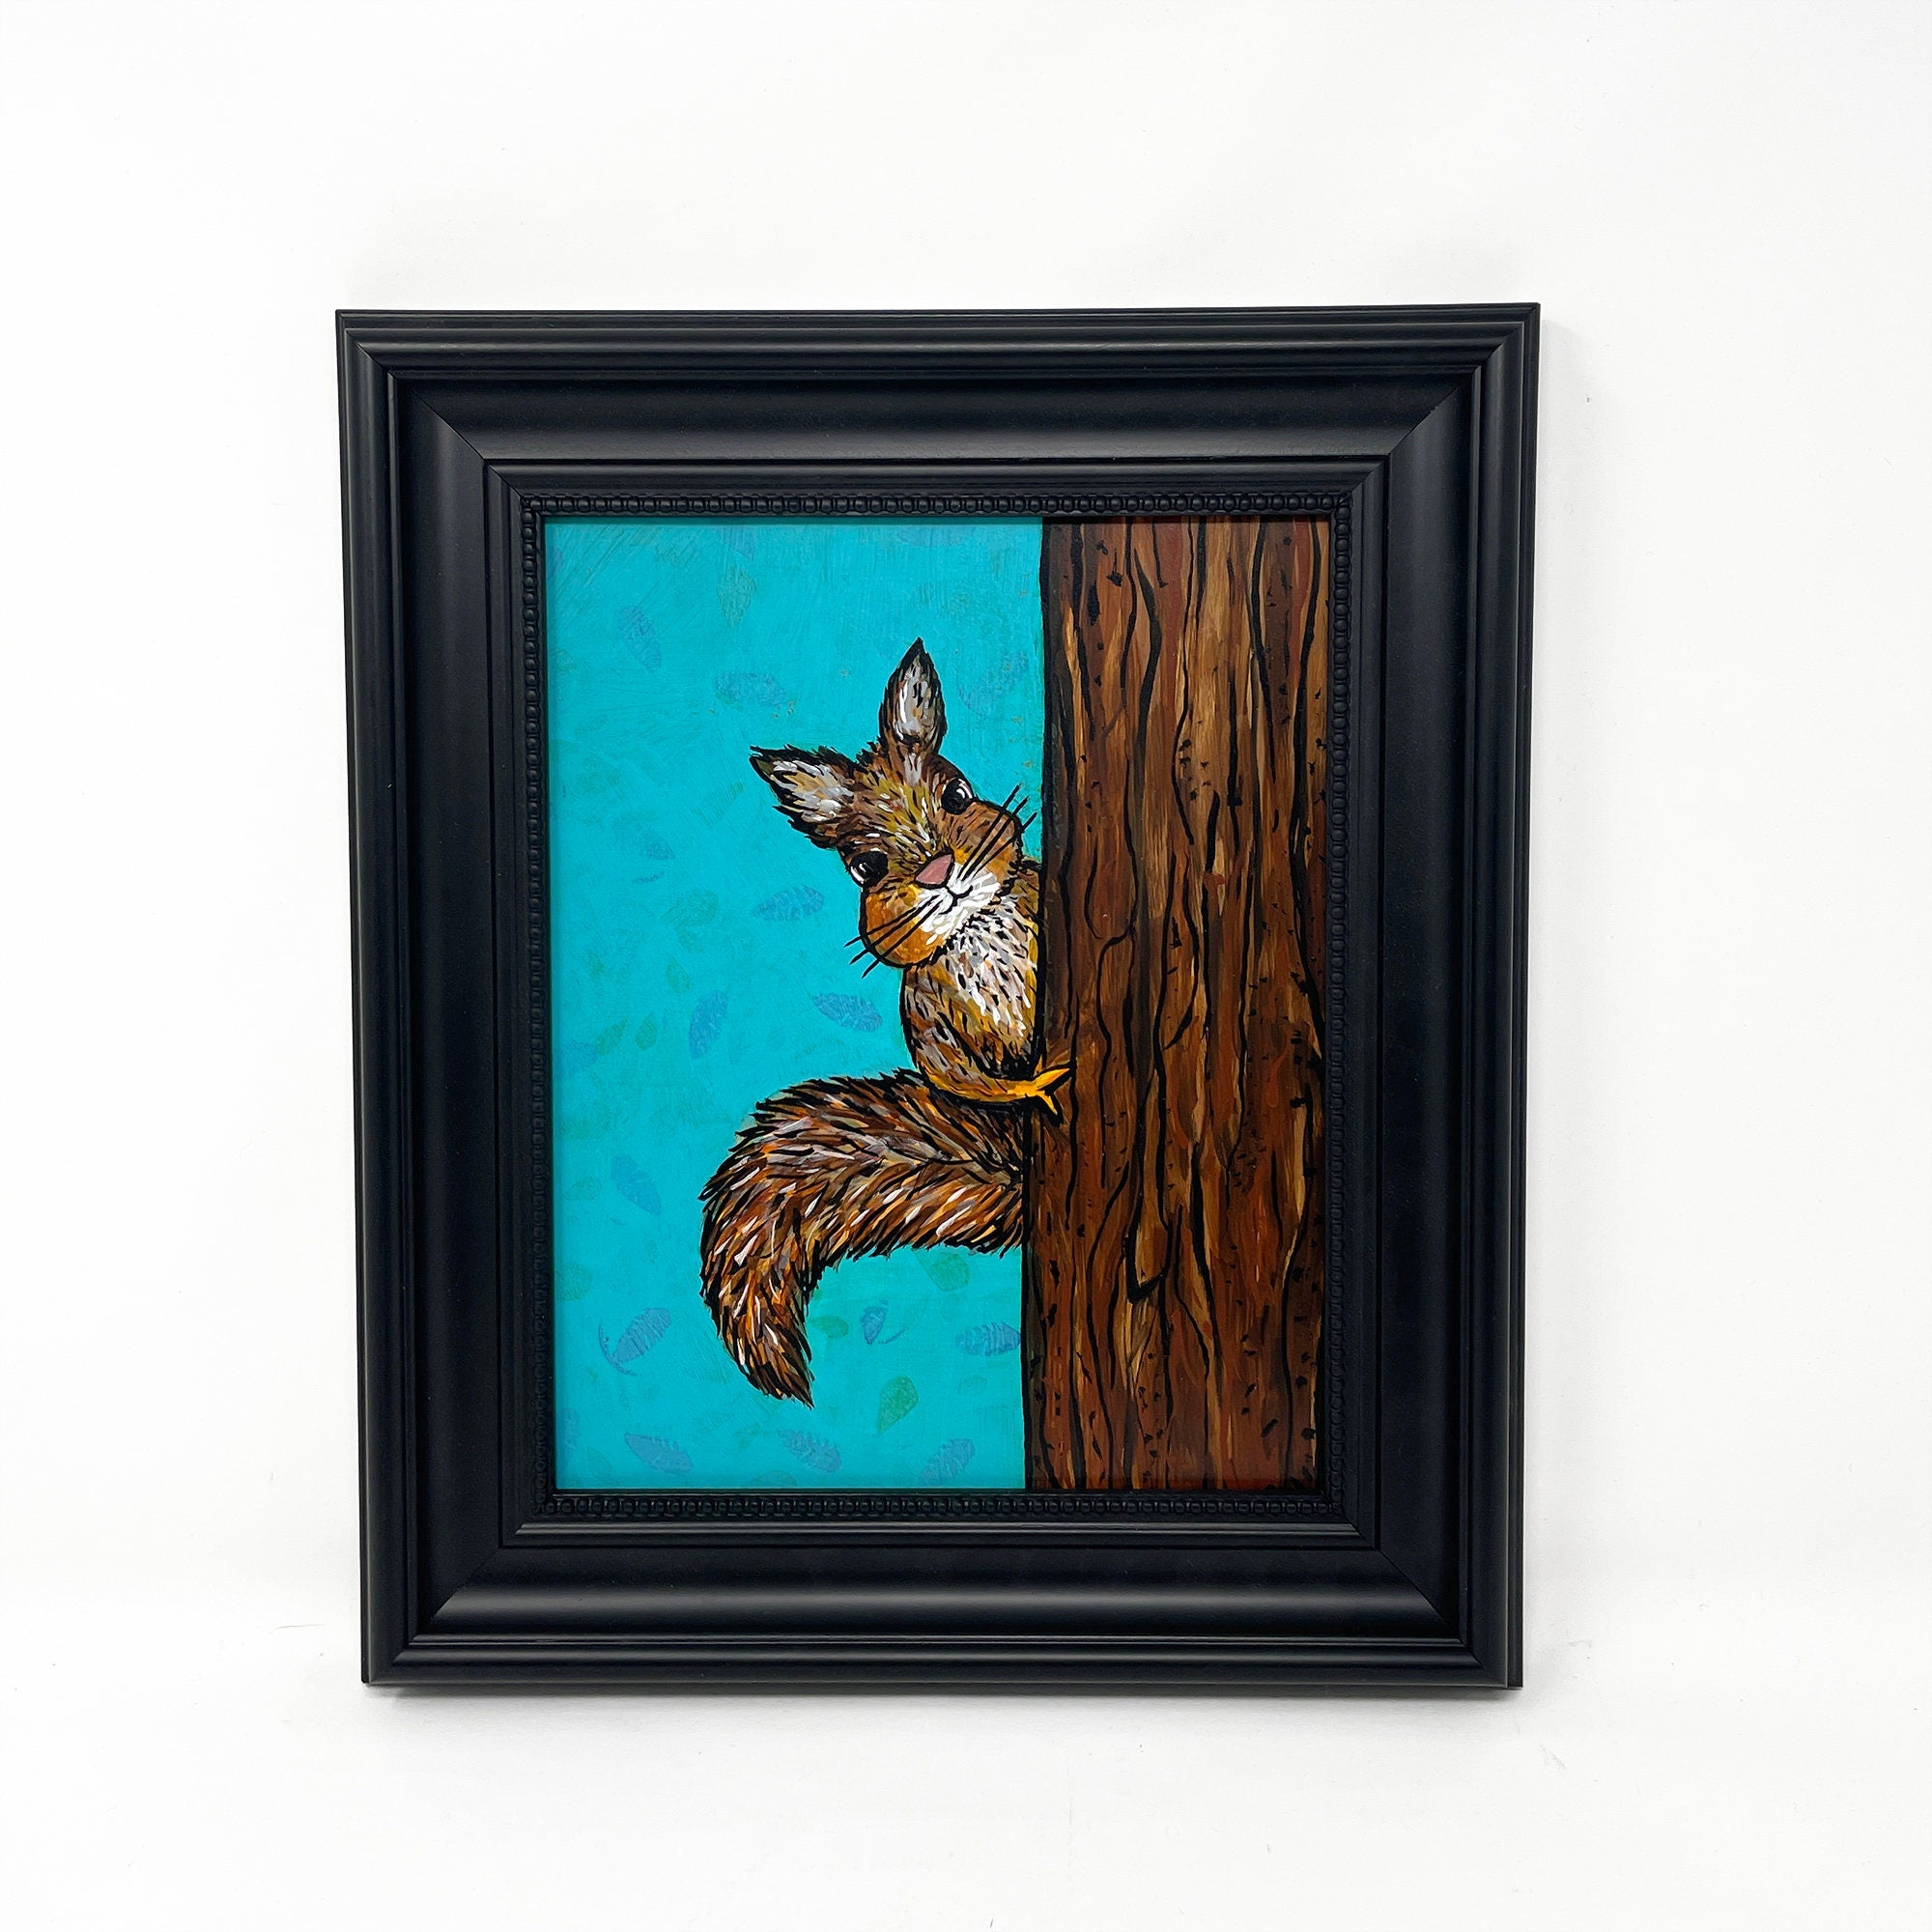 Squirrel Painting - Squirrel in a Tree Original Art - Framed Wildlife Painting - Forest Animal by Claudine Intner